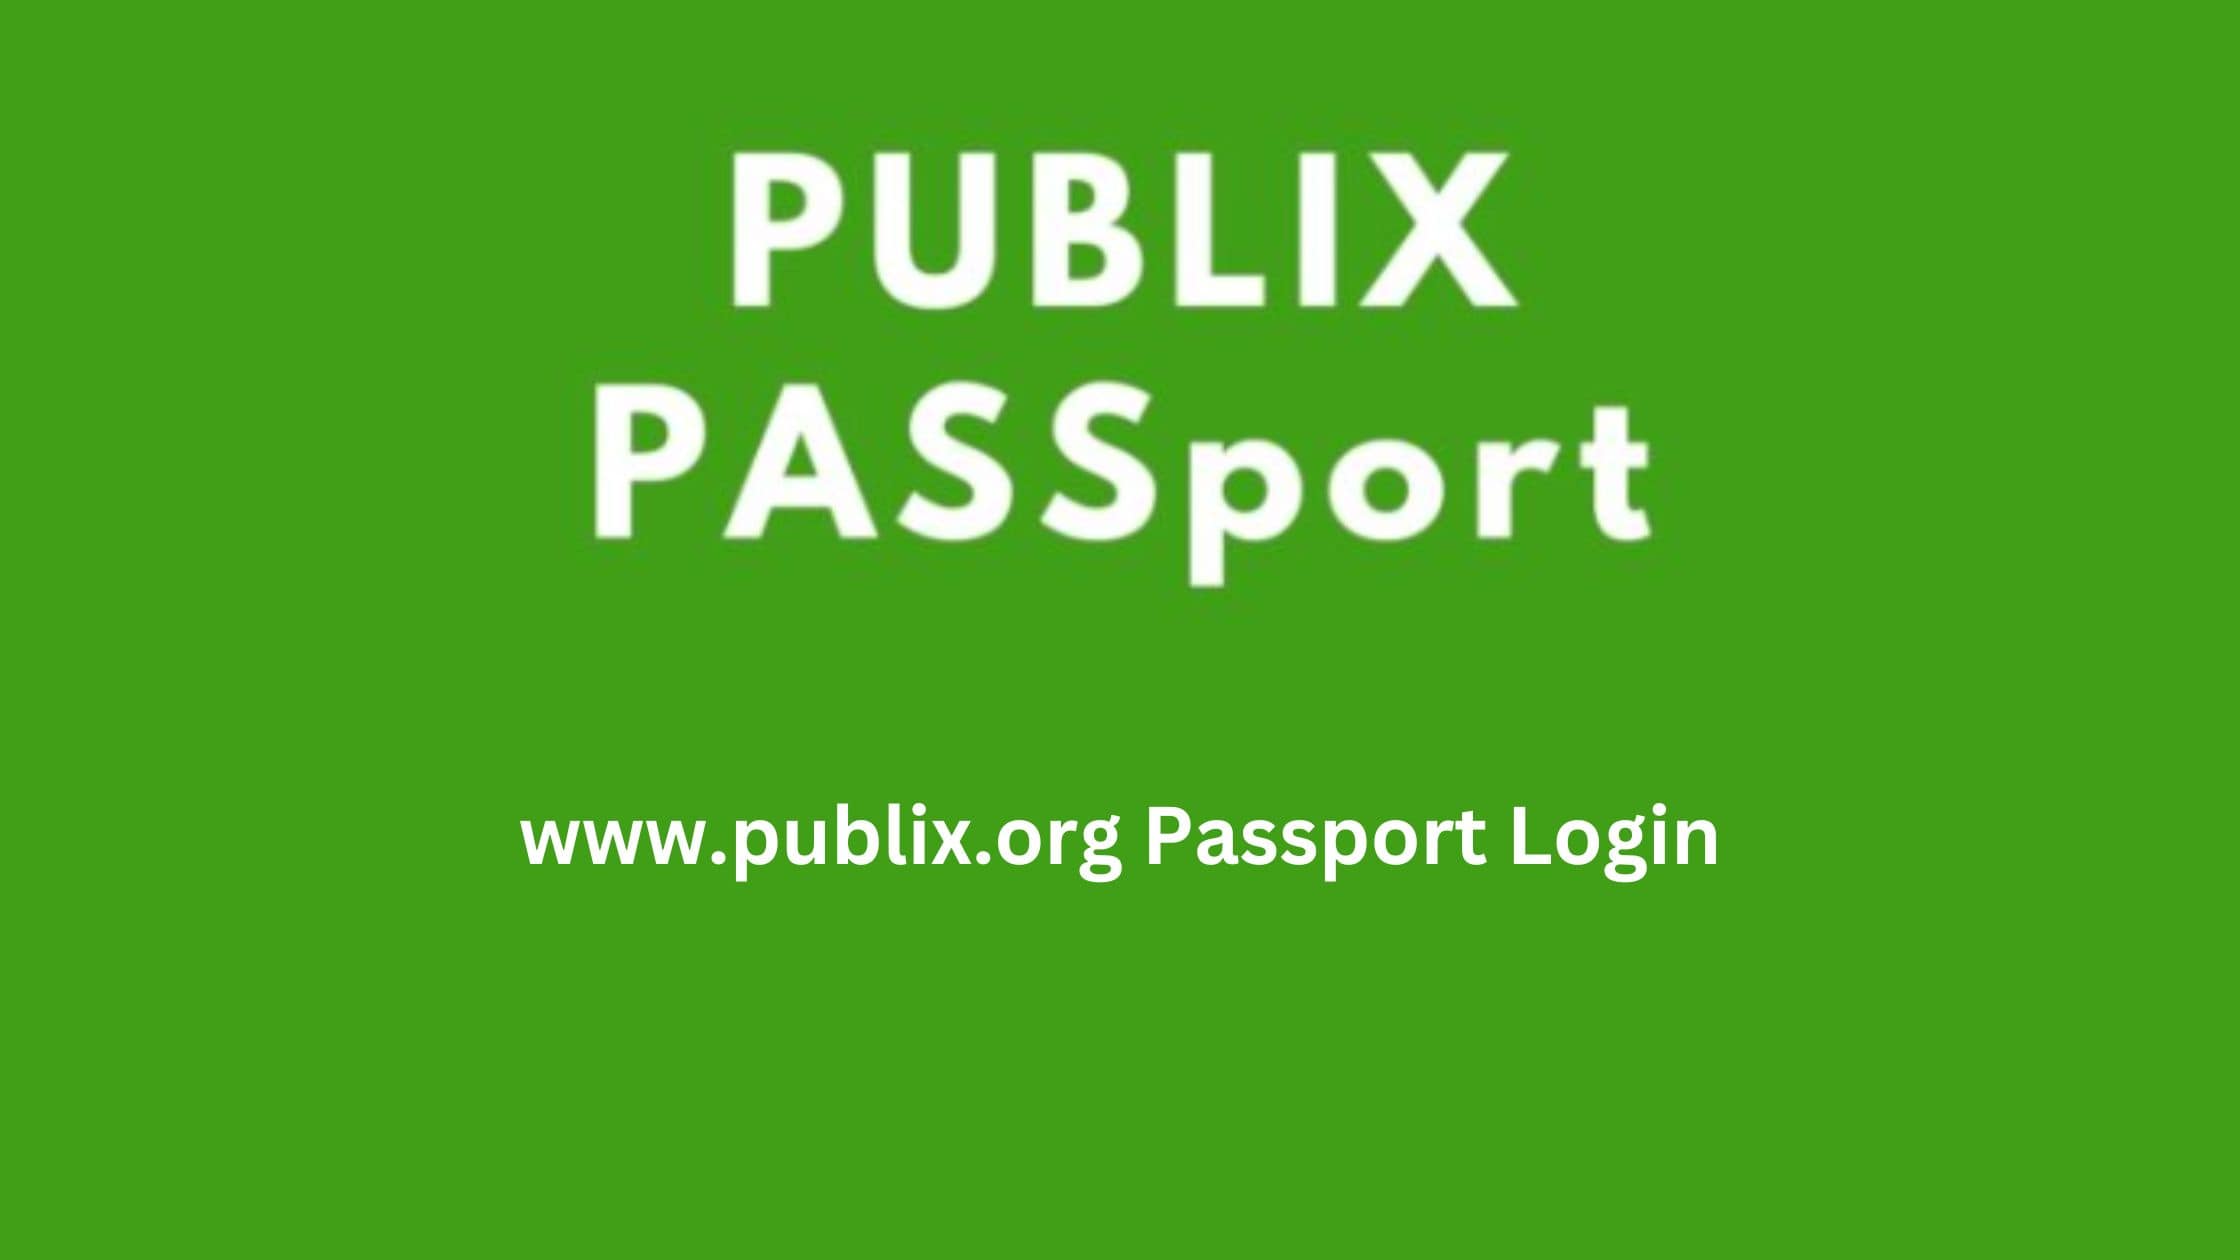 Go to www.Publix.org and use your Publix Passport to log in